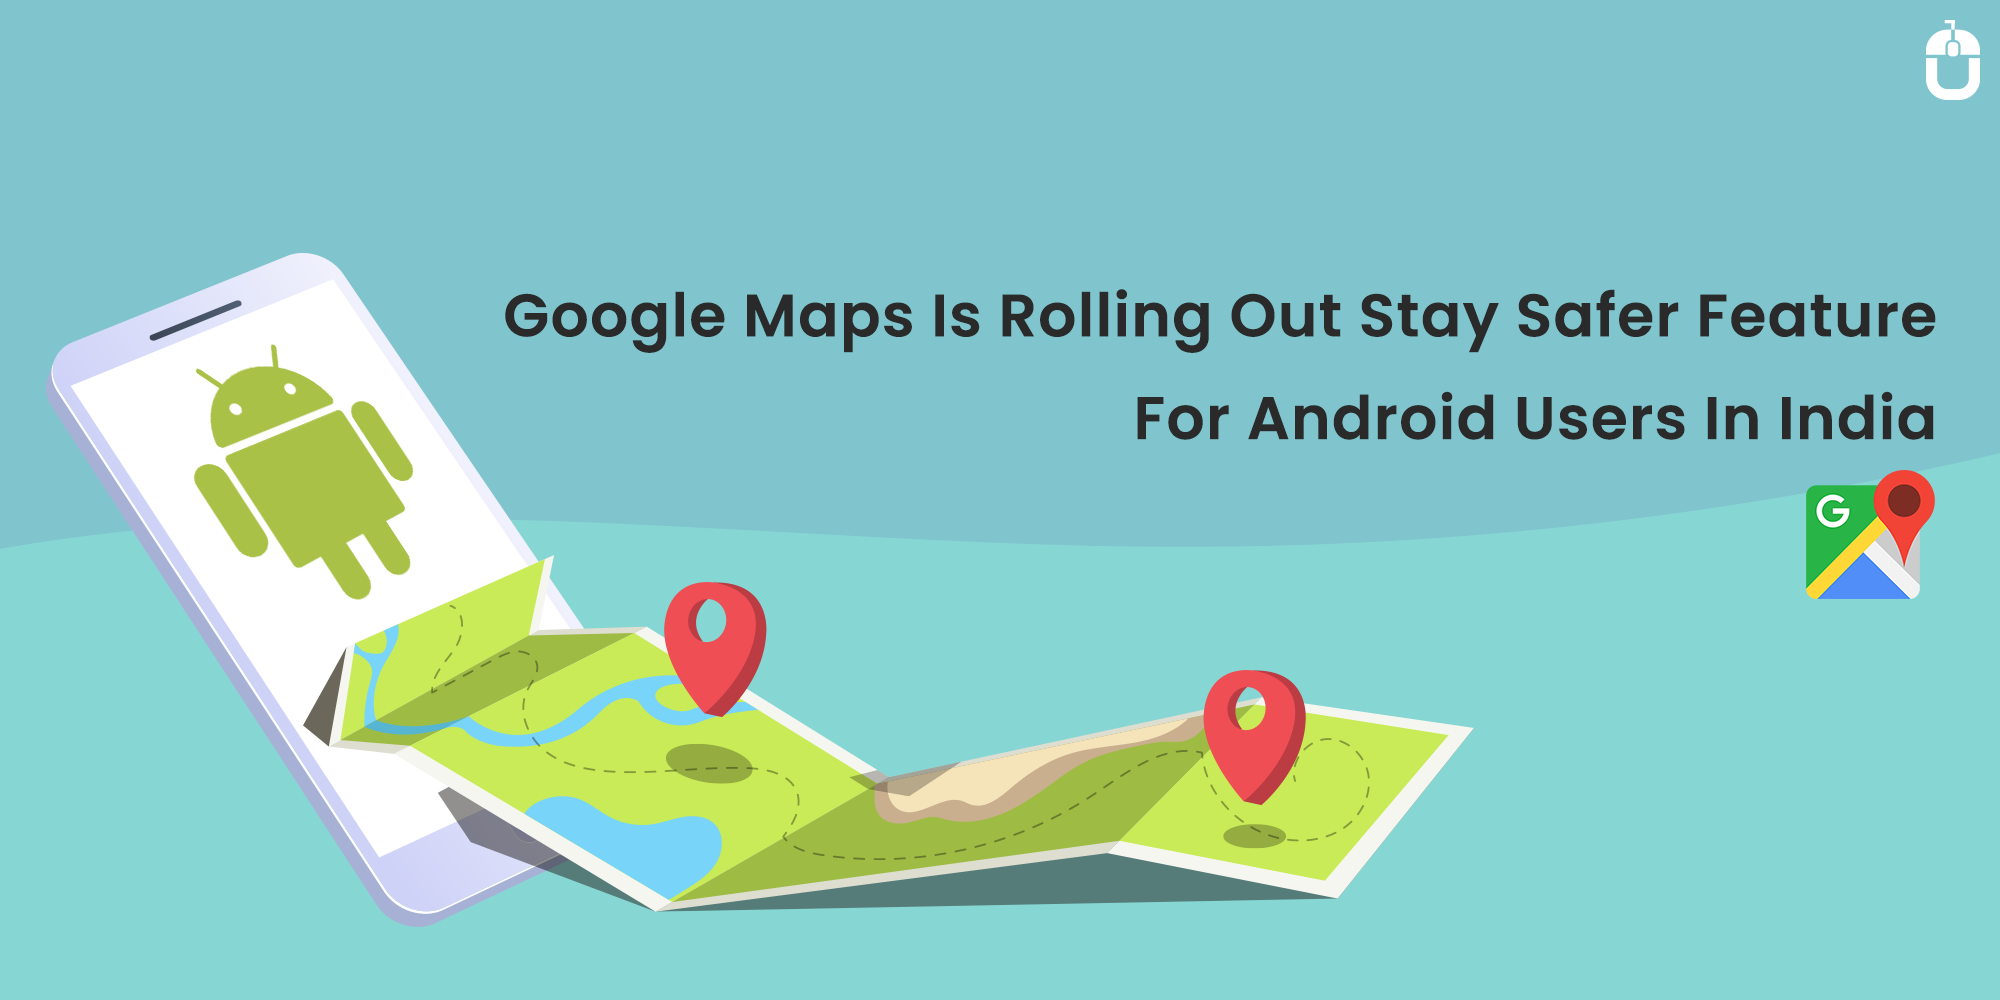 Google Maps Is Rolling Out Stay Safer Feature For Android Users In India